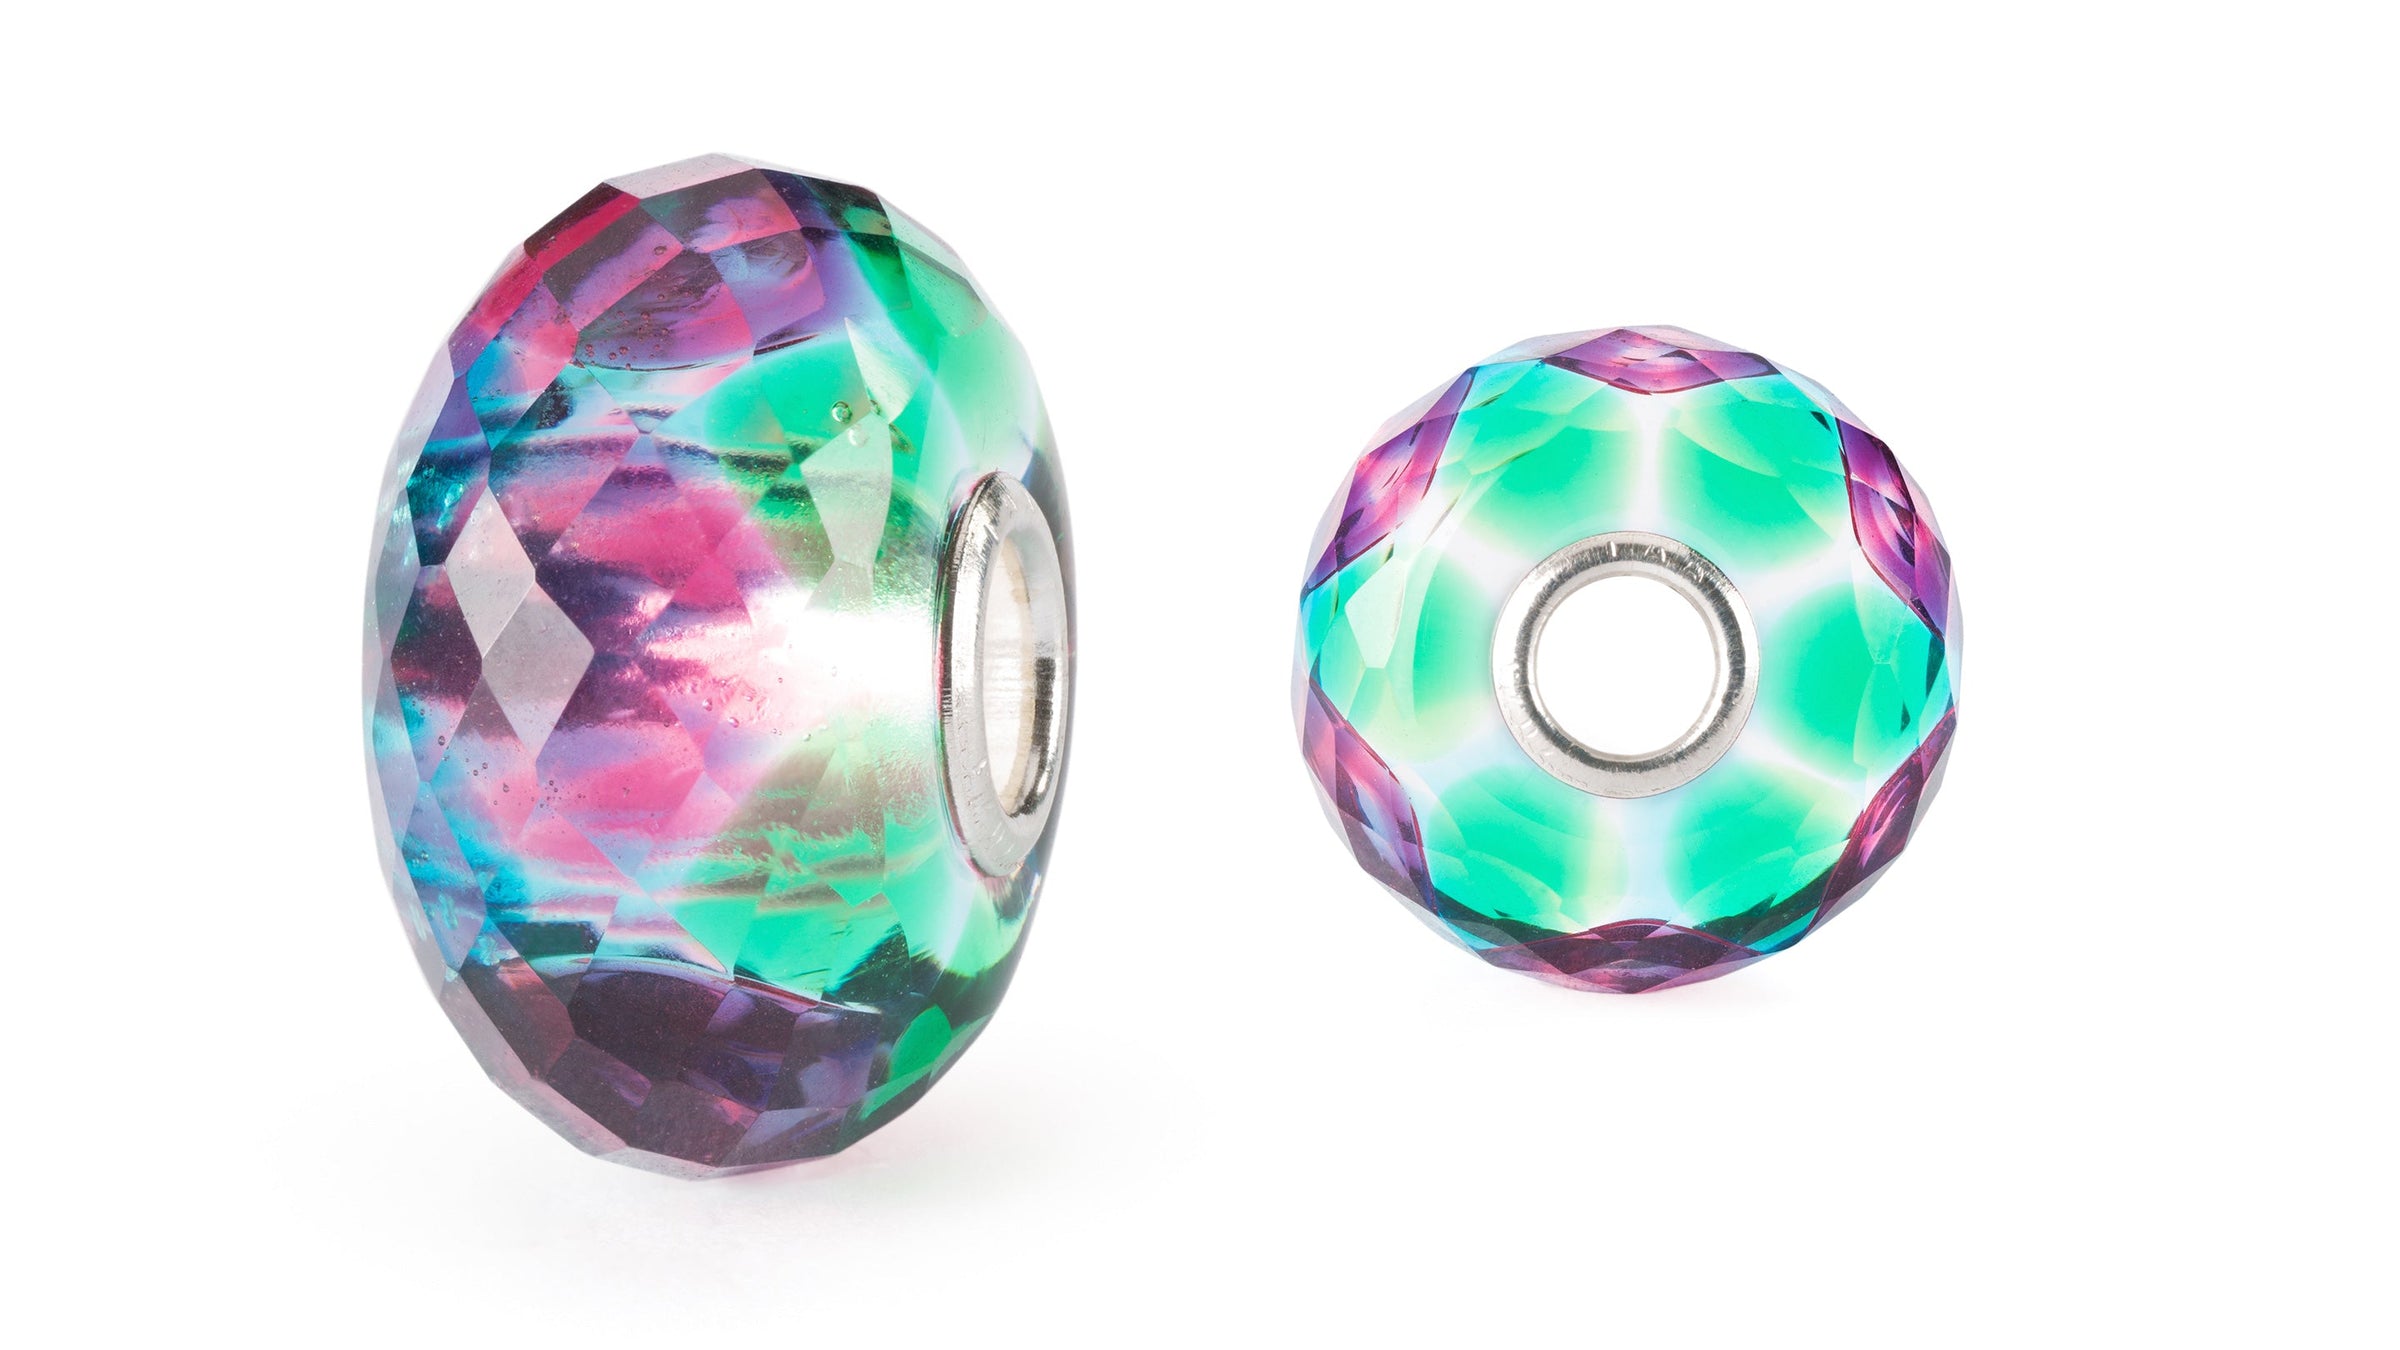 Trollbeads glass reflection bead, Layers of Strengths & Confidence